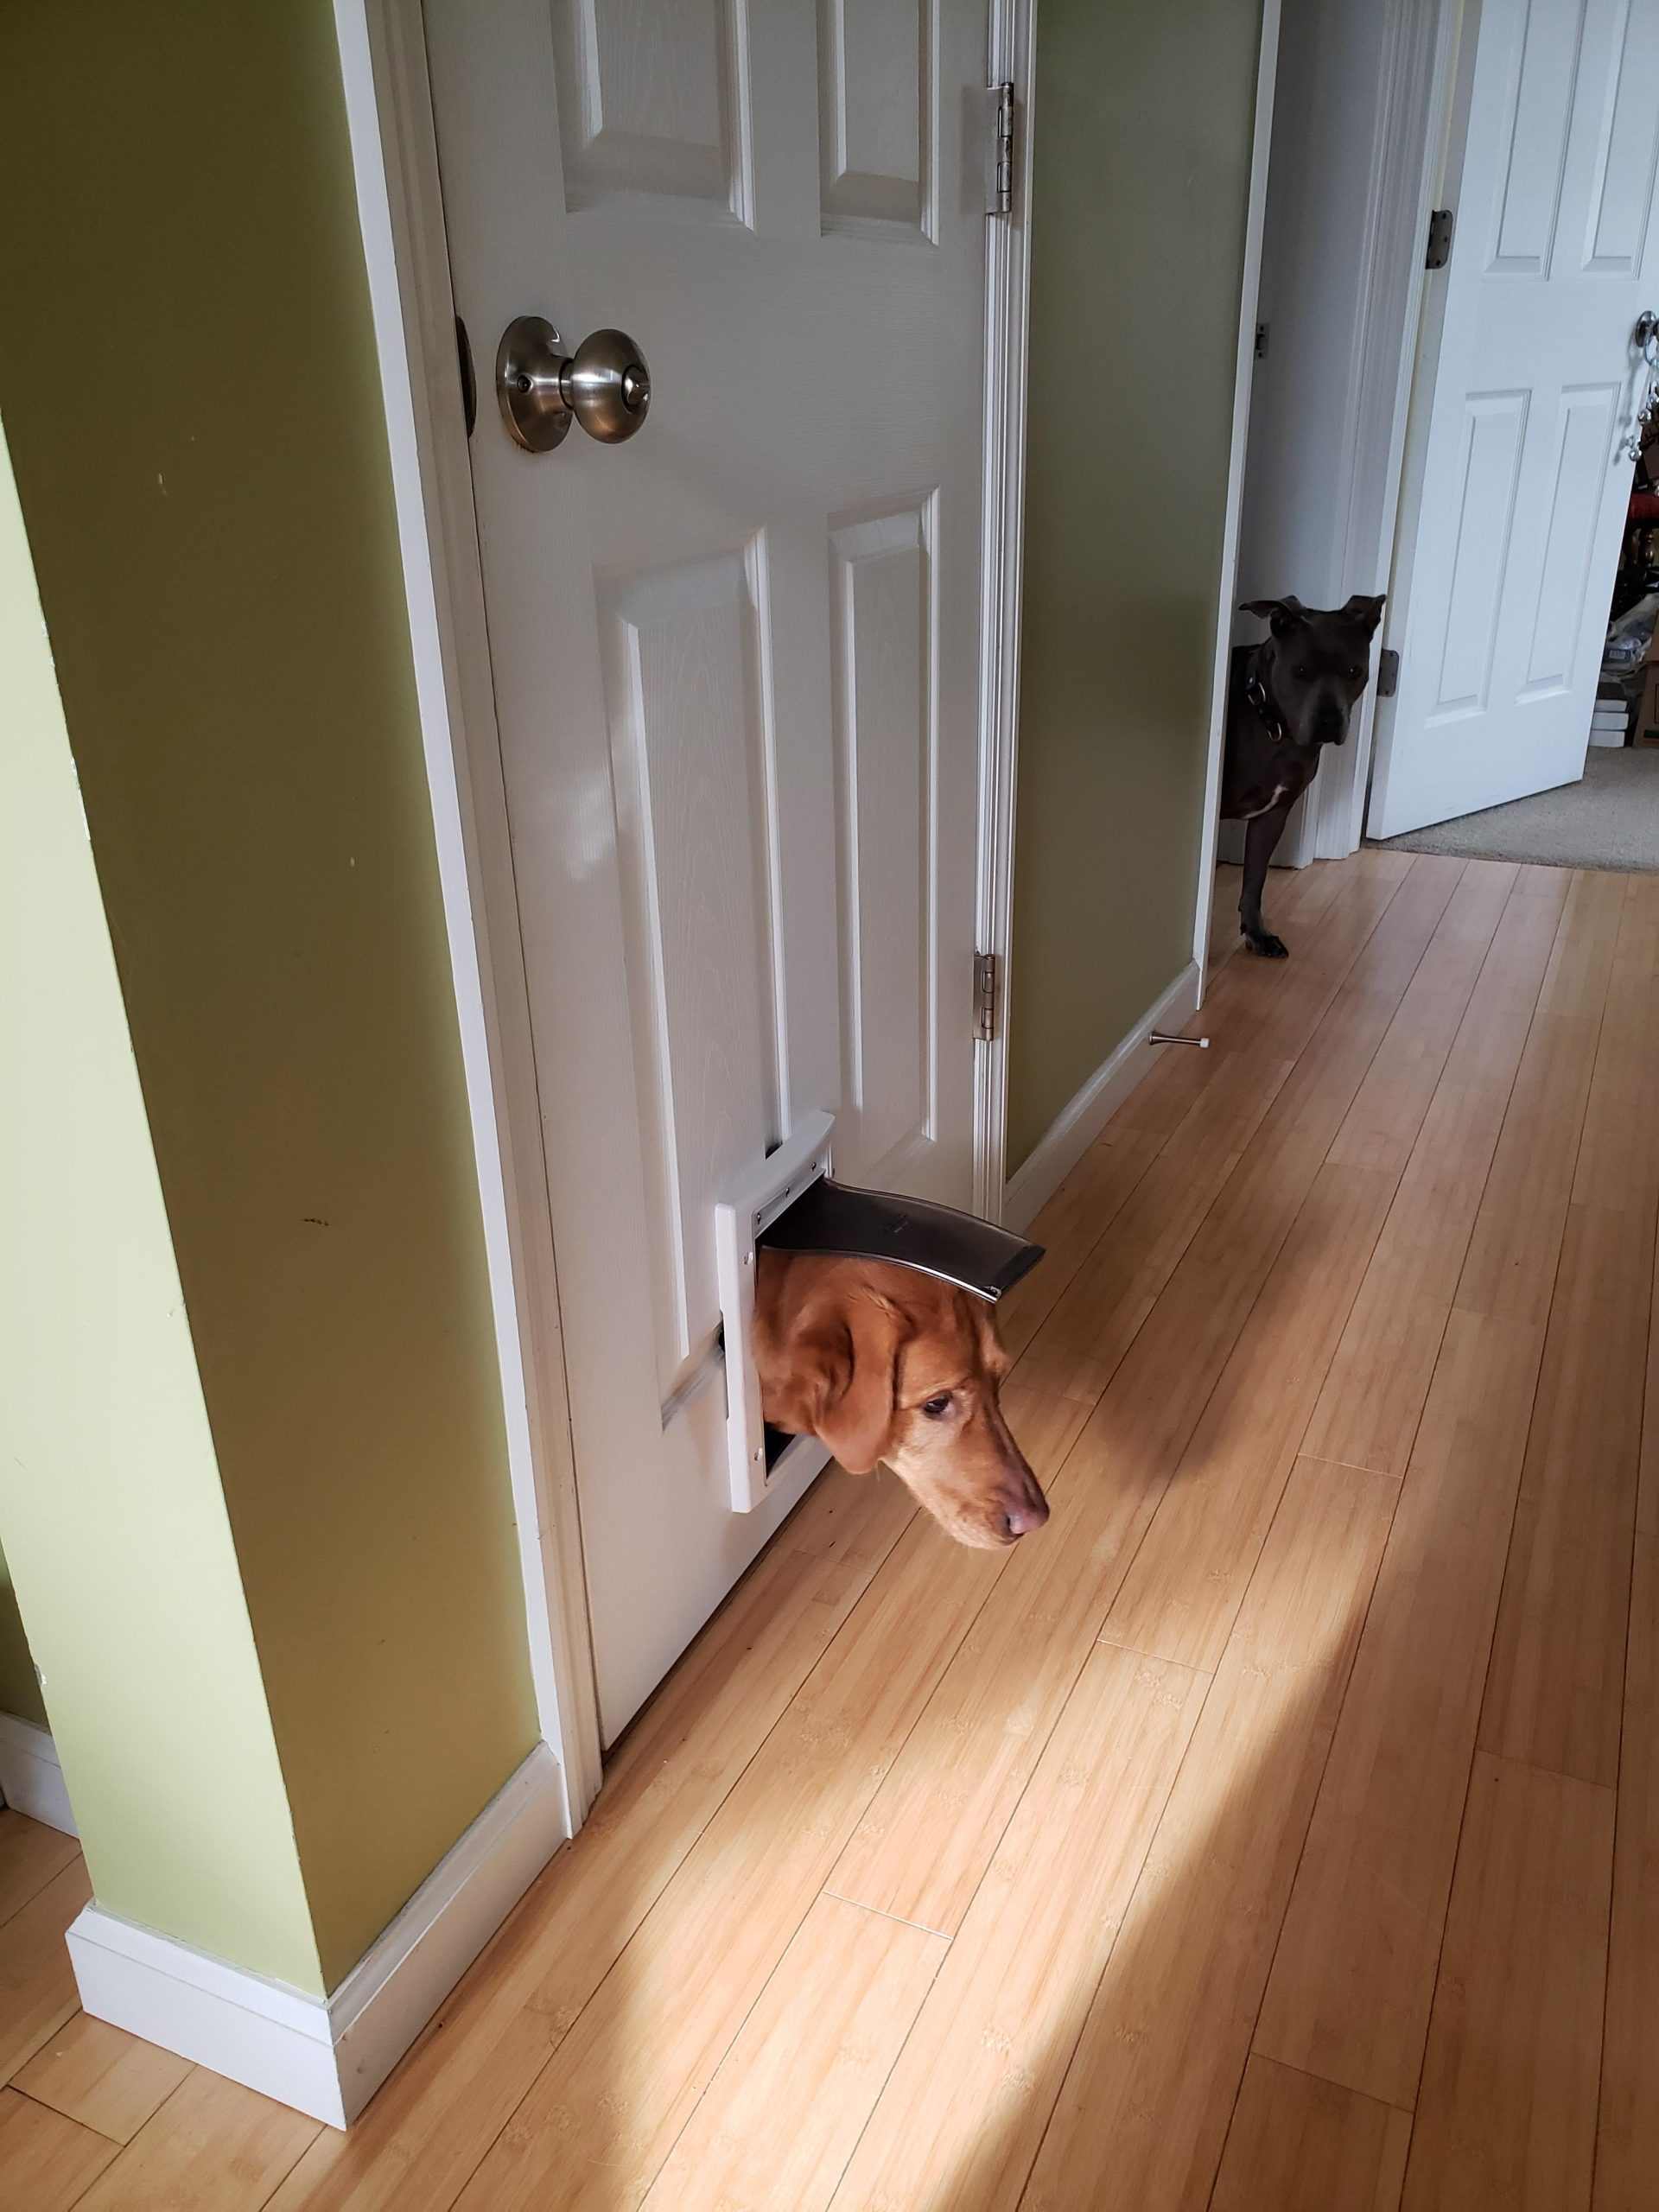 another look at Maddie with her head stuck in the tiny doggy door. a black dog is standing around the corner staring in amazement